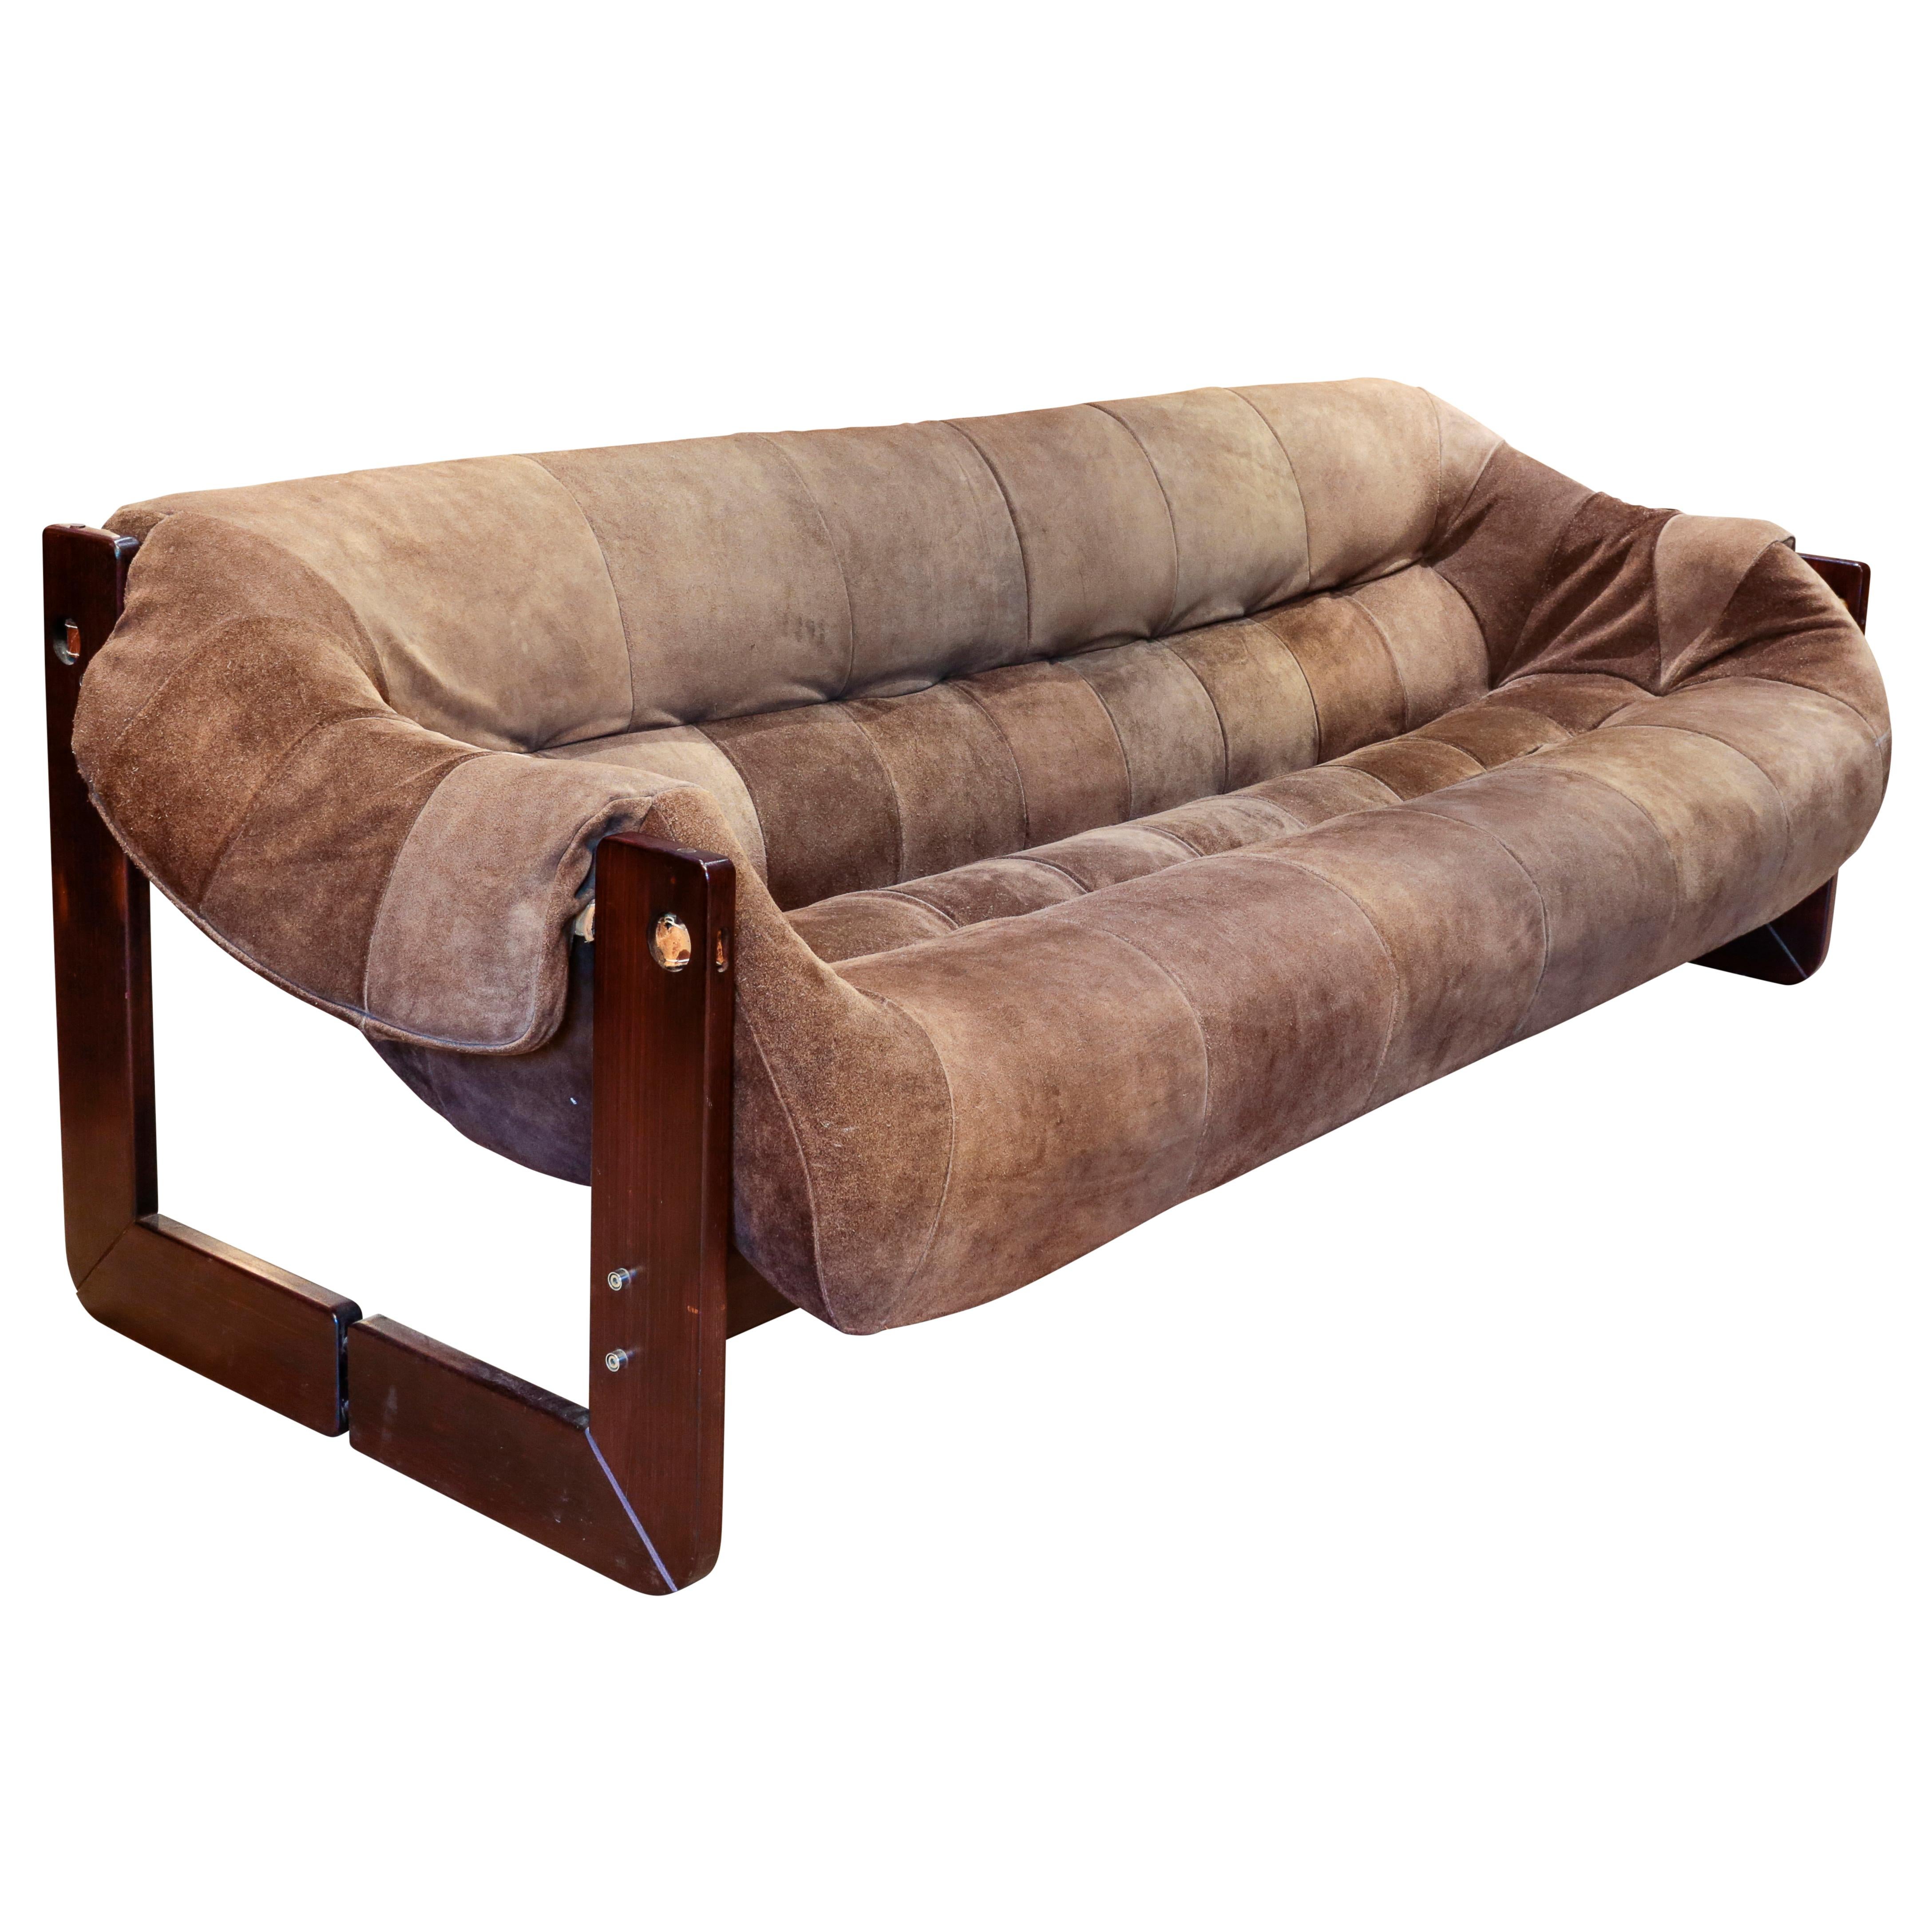 The frame crafted of heavy Brazilian rosewood solids, the sofa's pre-formed seat, back and arm cushions upholstered and hand-tufted in the original brown patchwork suede leather, Brazil, circa 1965.